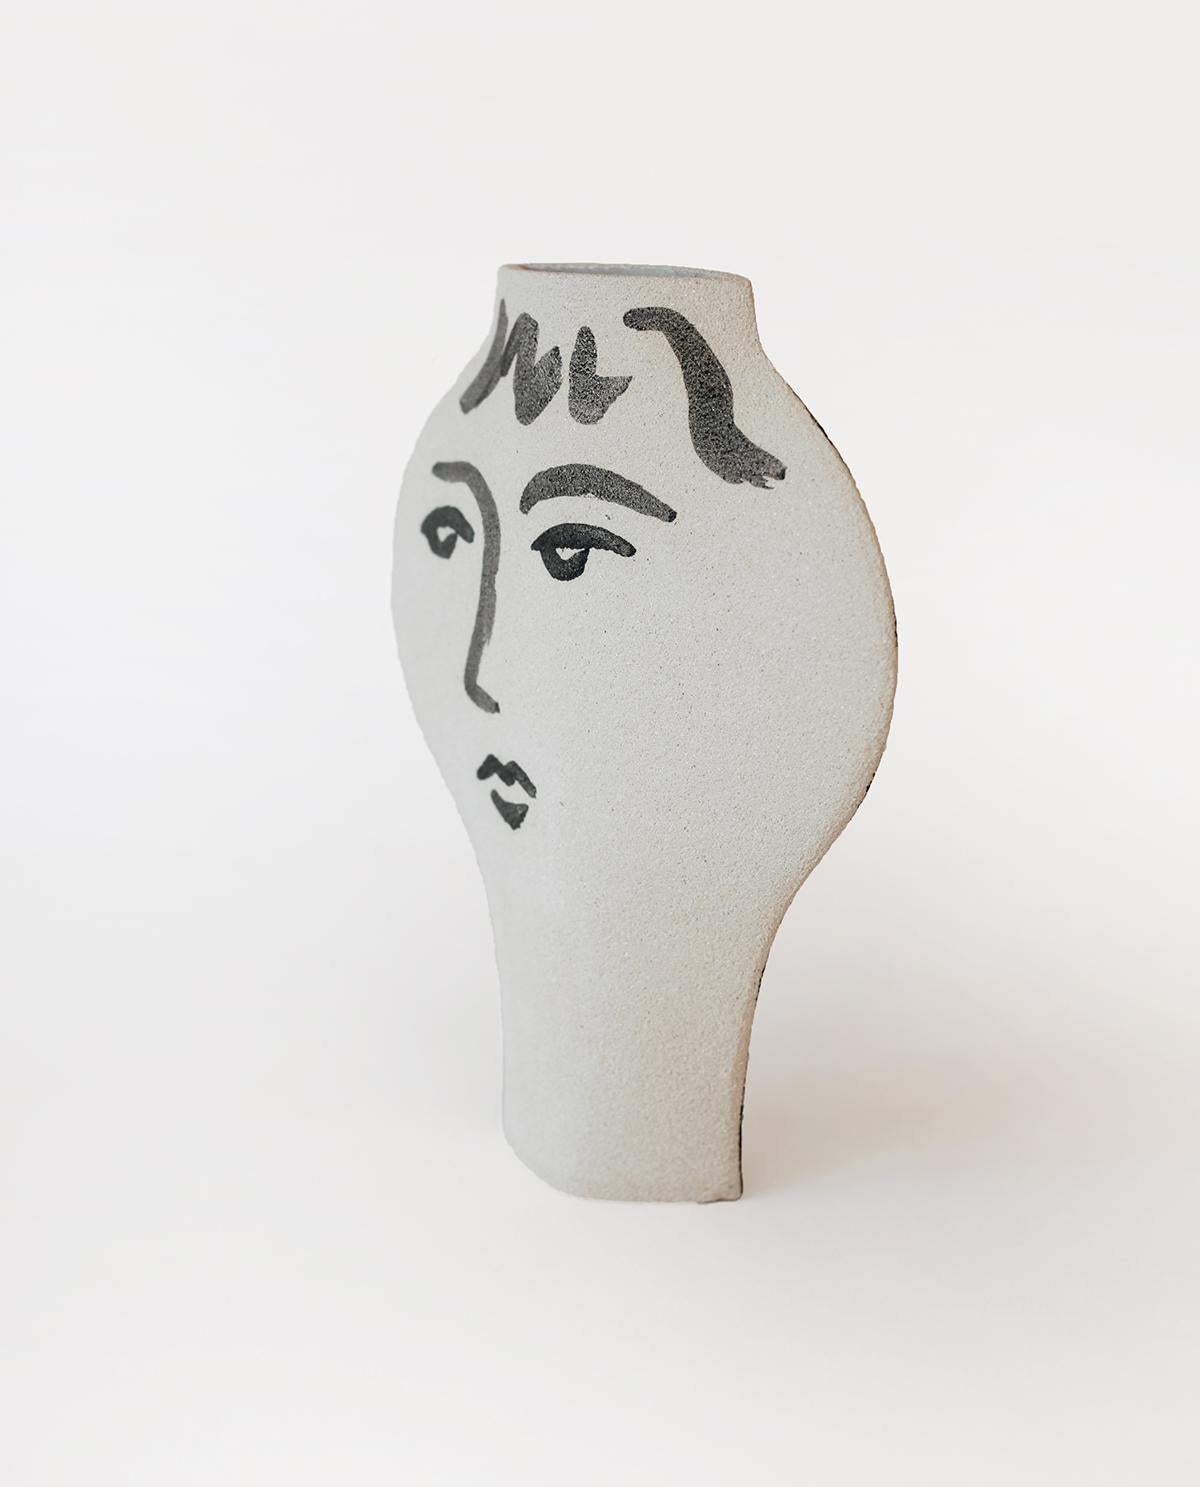 ‘Portrait’ Handmade Ceramic White Vase

This vase is part of a new series inspired by iconic illustrative movements. Here is our DAL model with motifs based on figurative portrait illustrations. They are hand-painted to the vase before its first